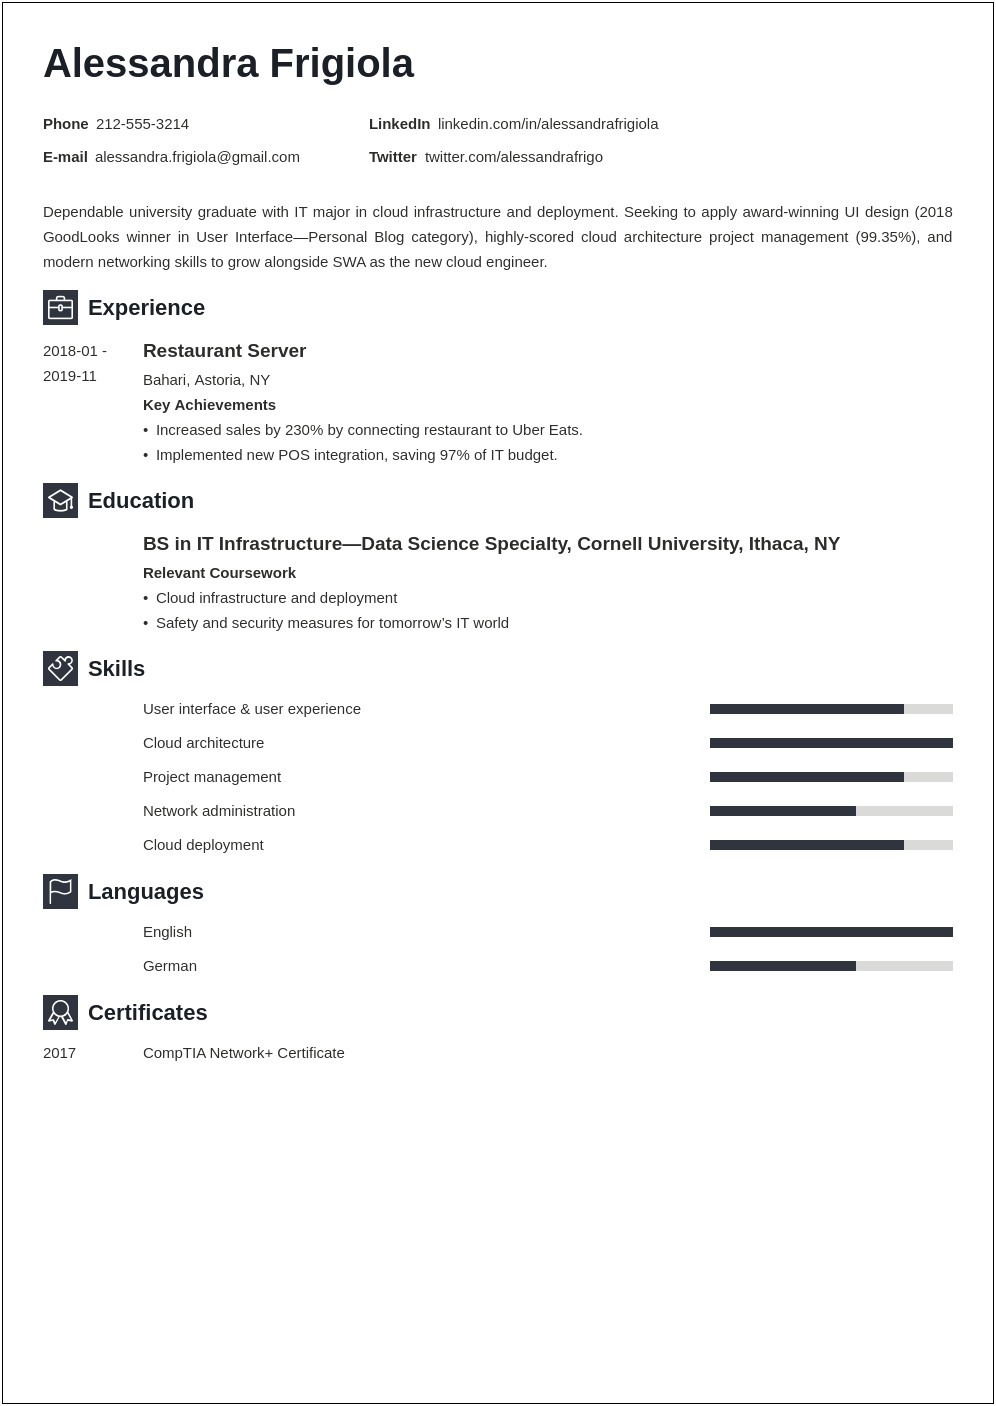 Is Objective Required For A Resume